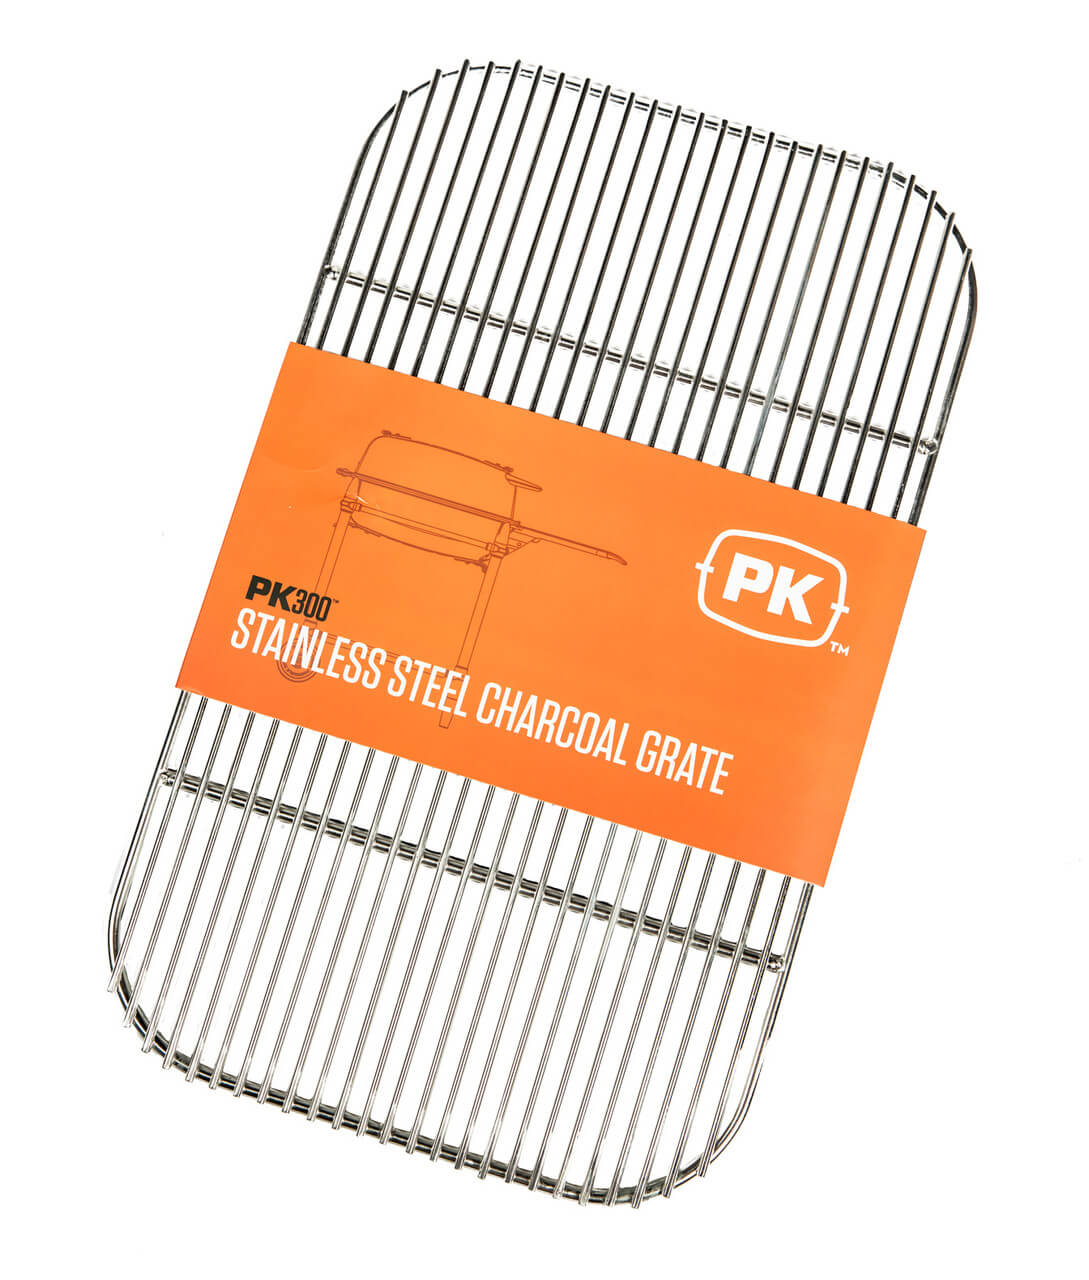 PK300 Stainless Steel Charcoal Grate